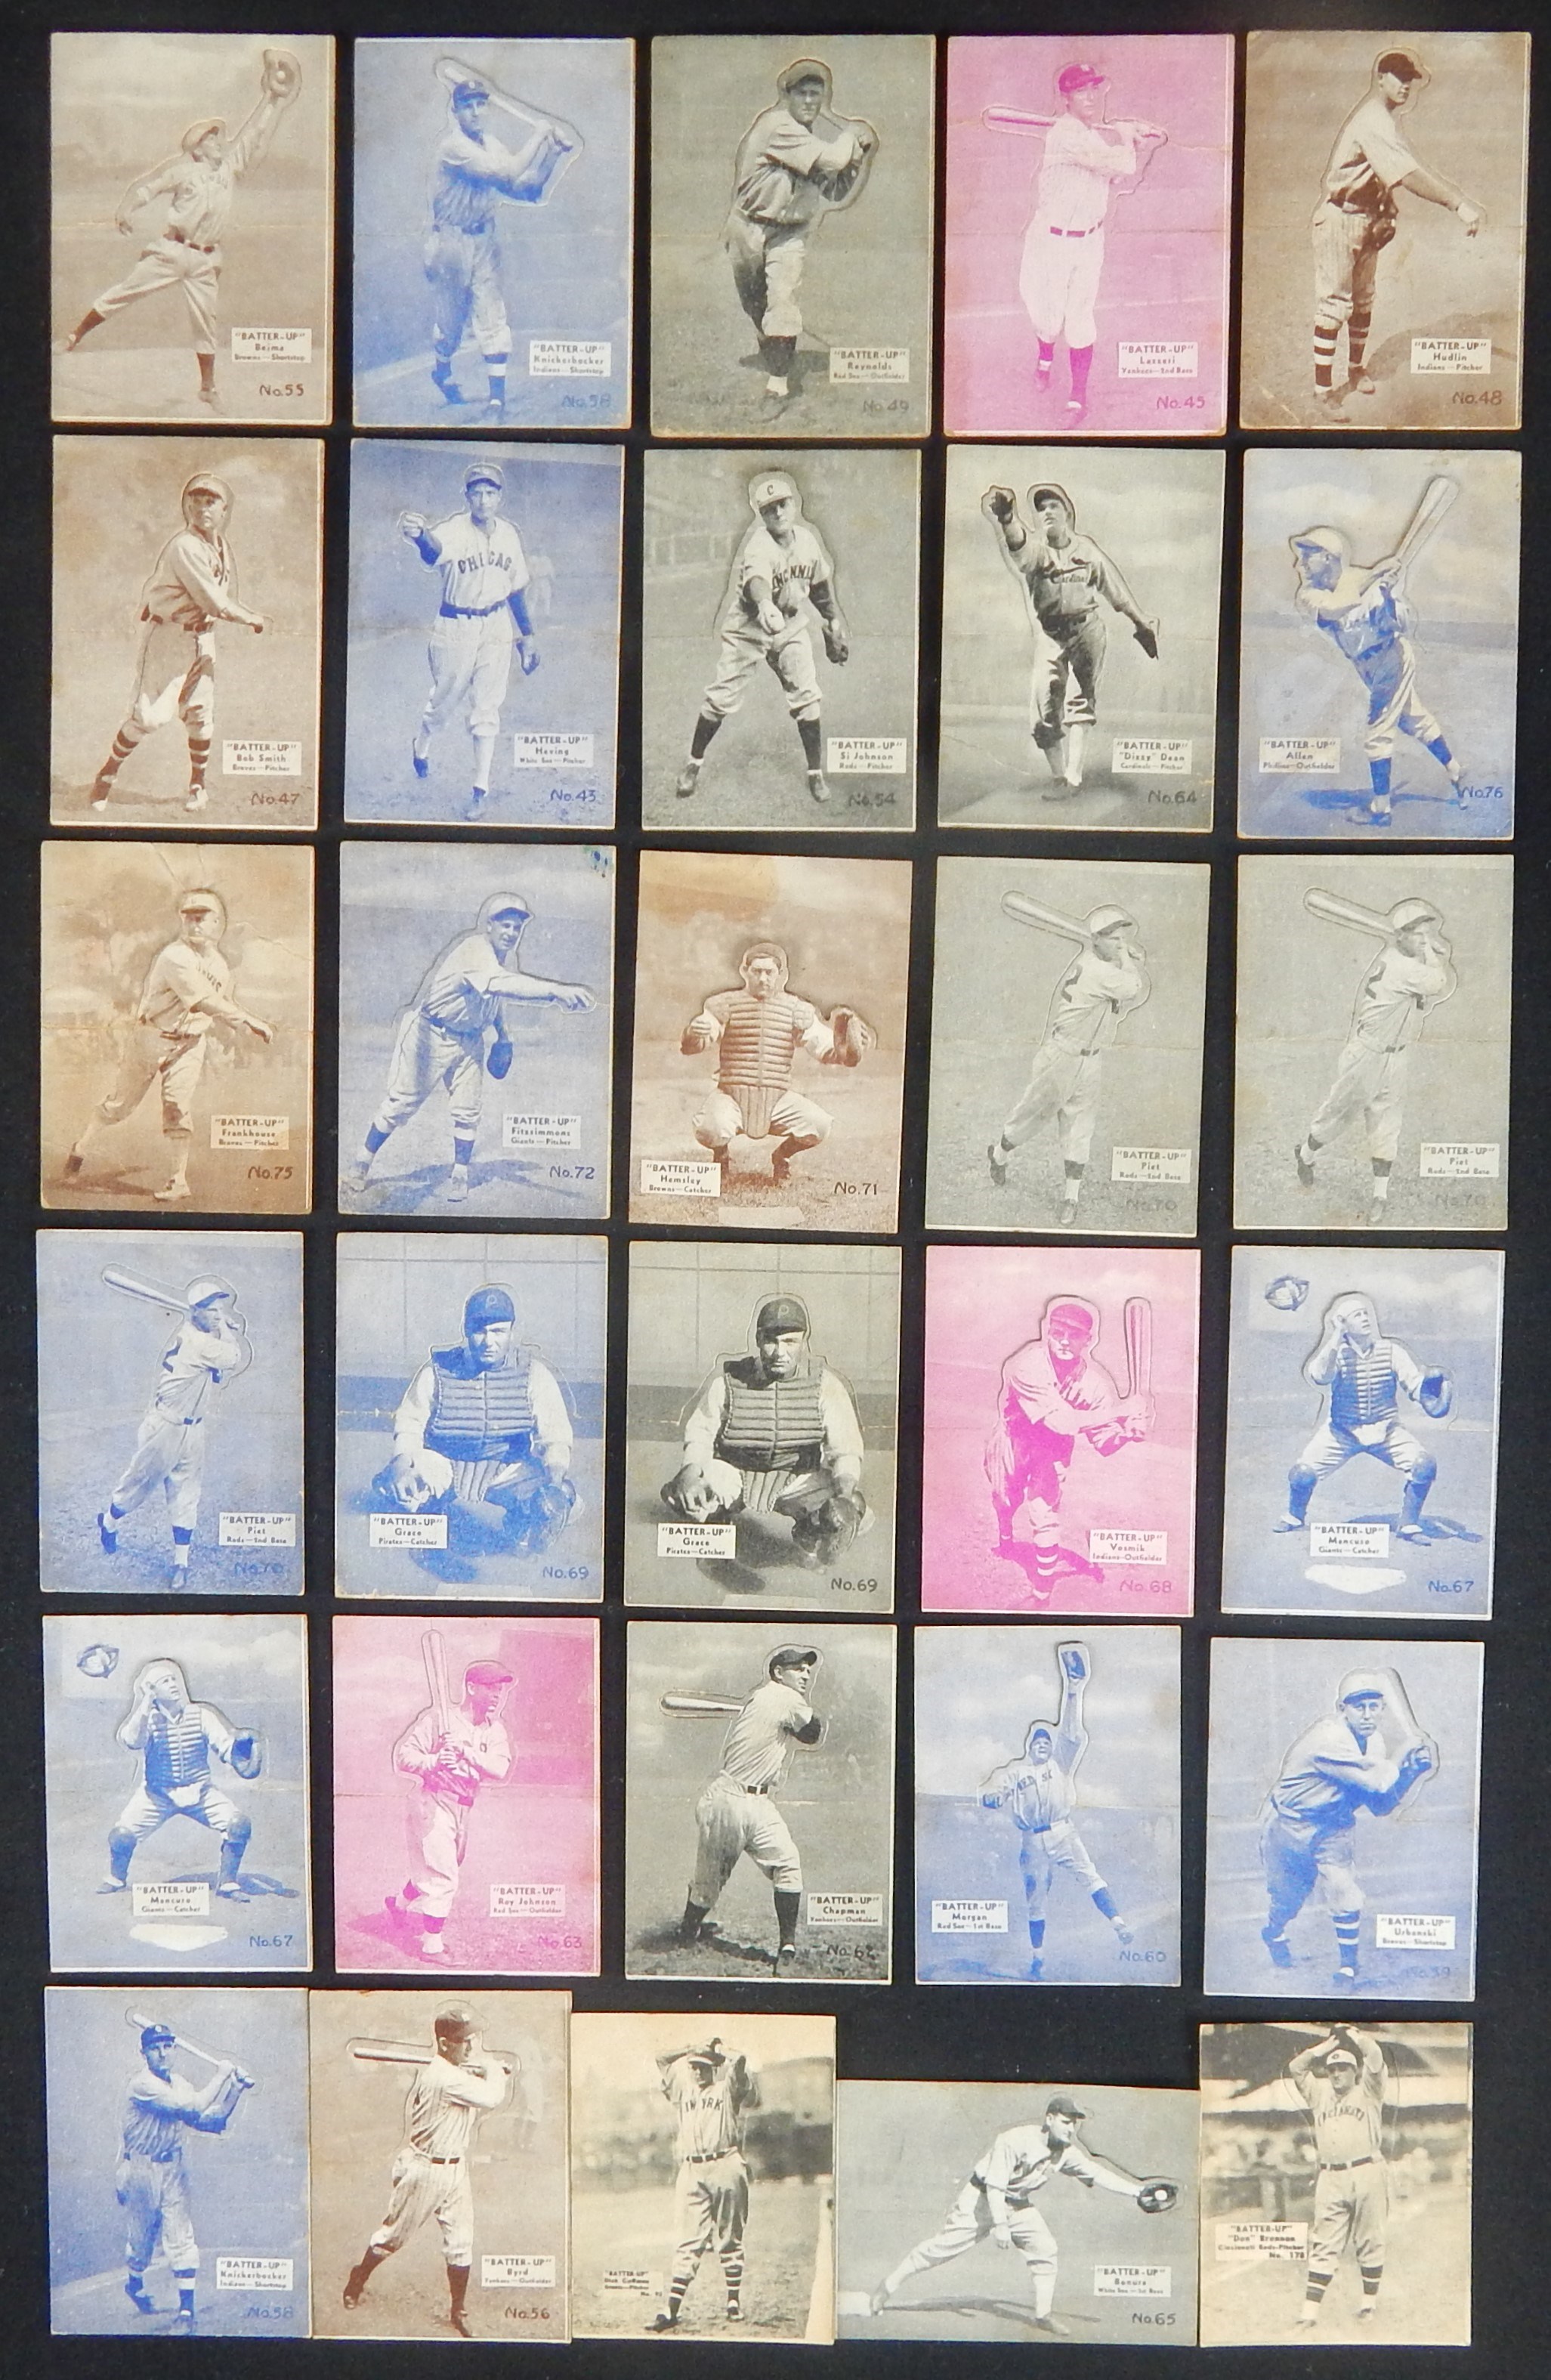 - 1934-36 "Batter Up" Collection of 30 cards w/Lazzeri and Dean